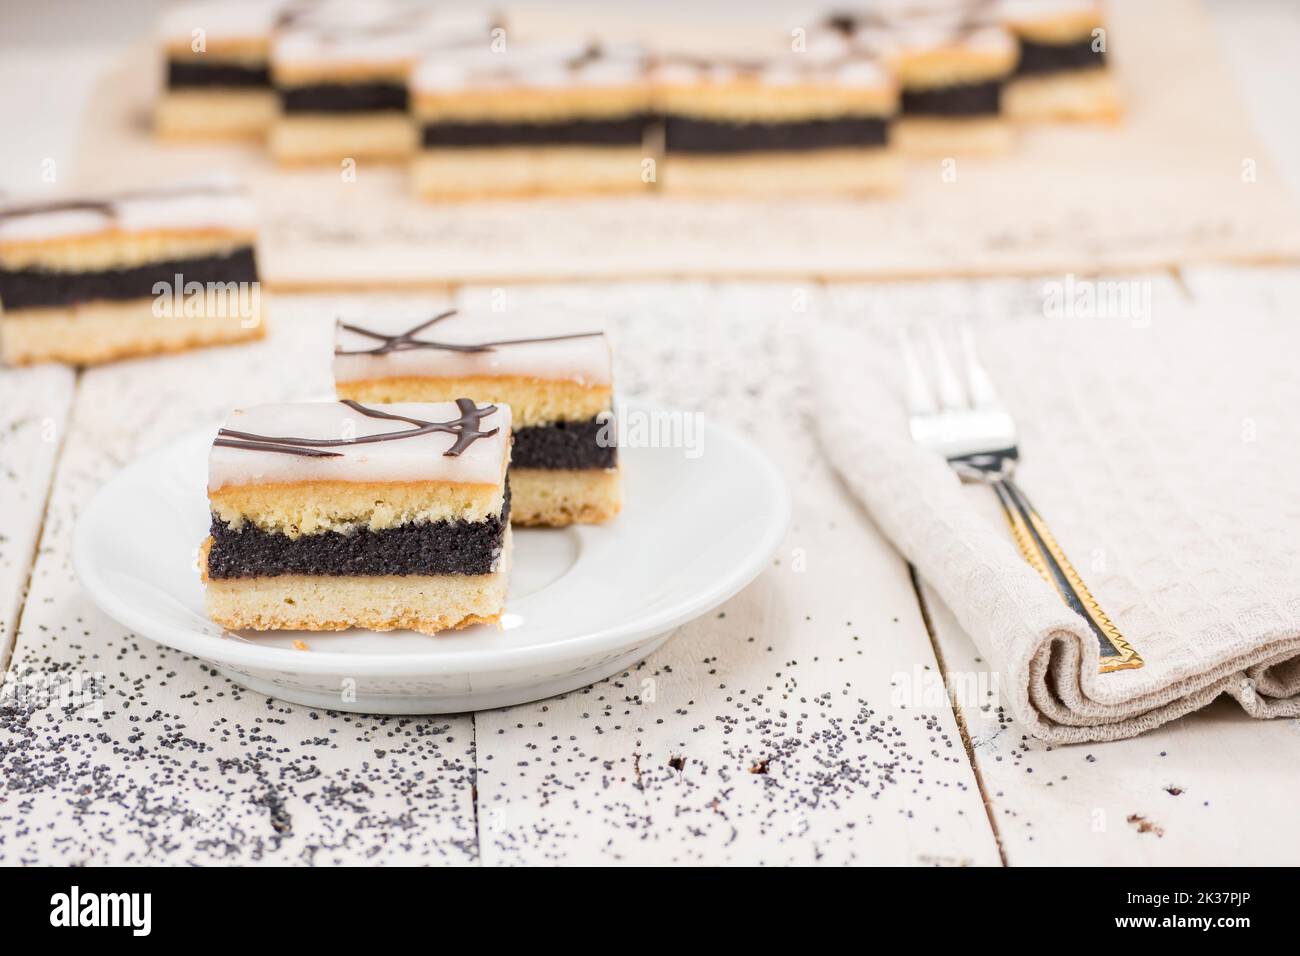 Poppy cake slices topped with sugar icing, decorated with melted chocolate. Pie name Berlin cake. Served on the white wooden table. Sweet dessert. Stock Photo